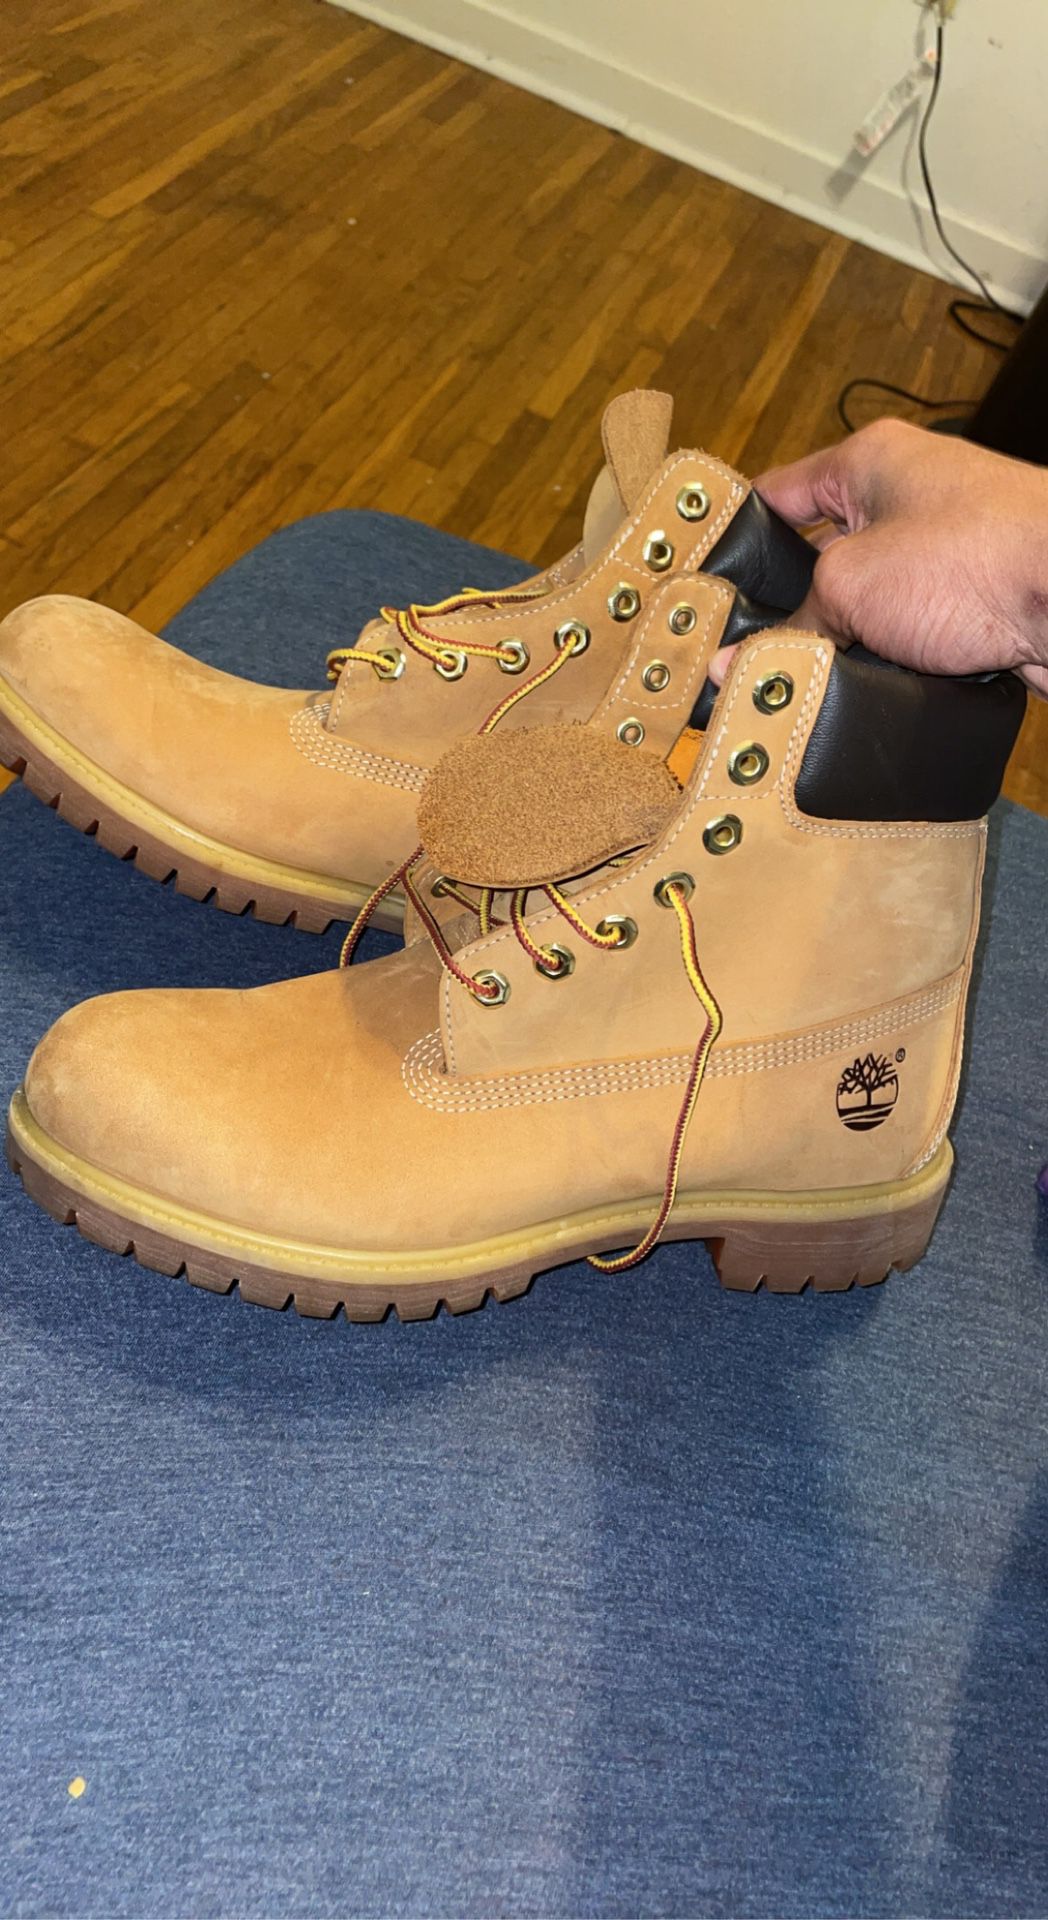 Classic Timberland Boots